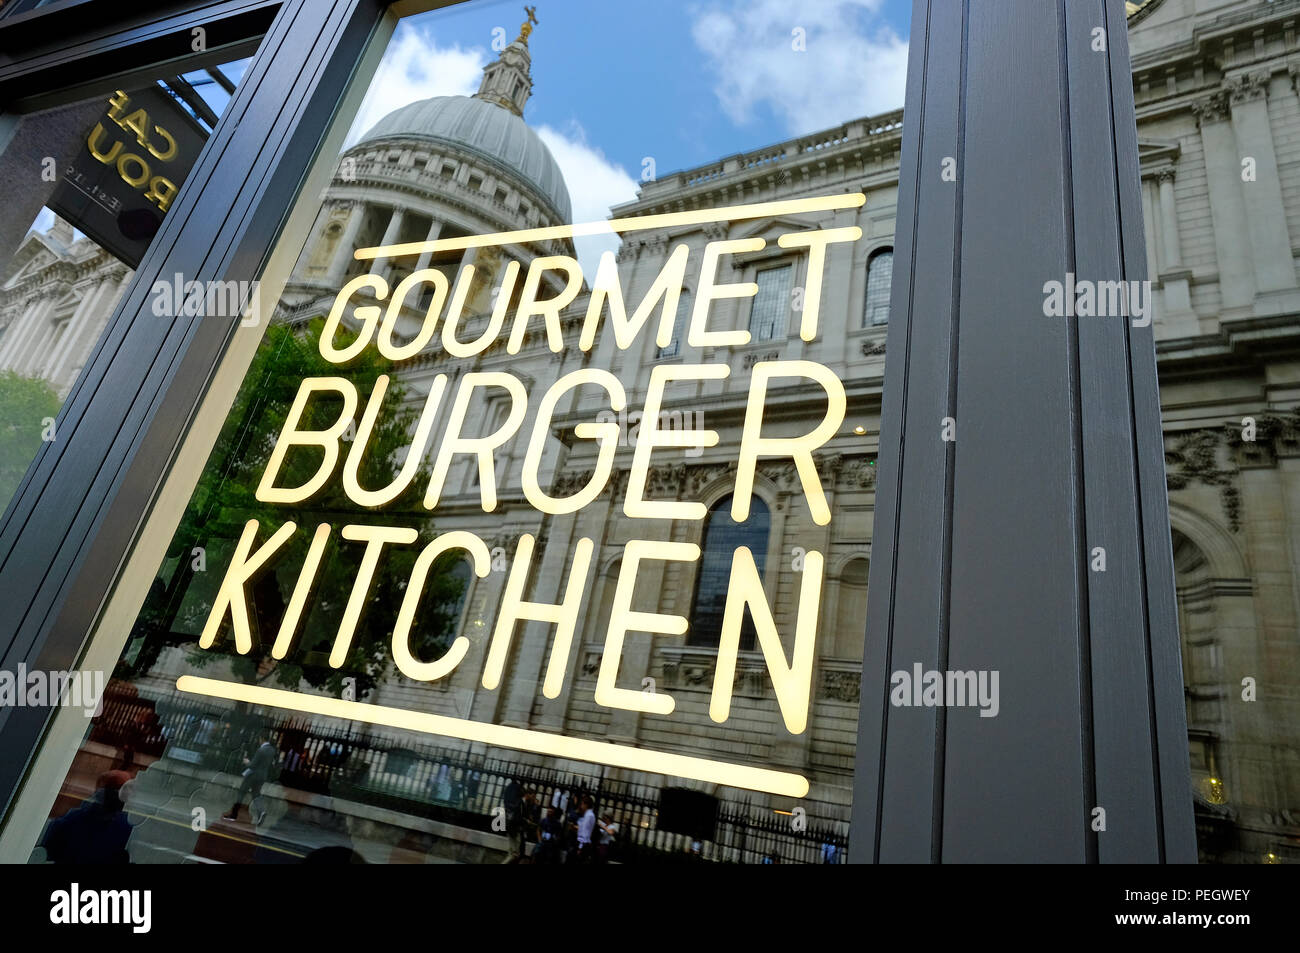 gourmet burger kitchen branch opposite st paul's cathedral, london, england Stock Photo